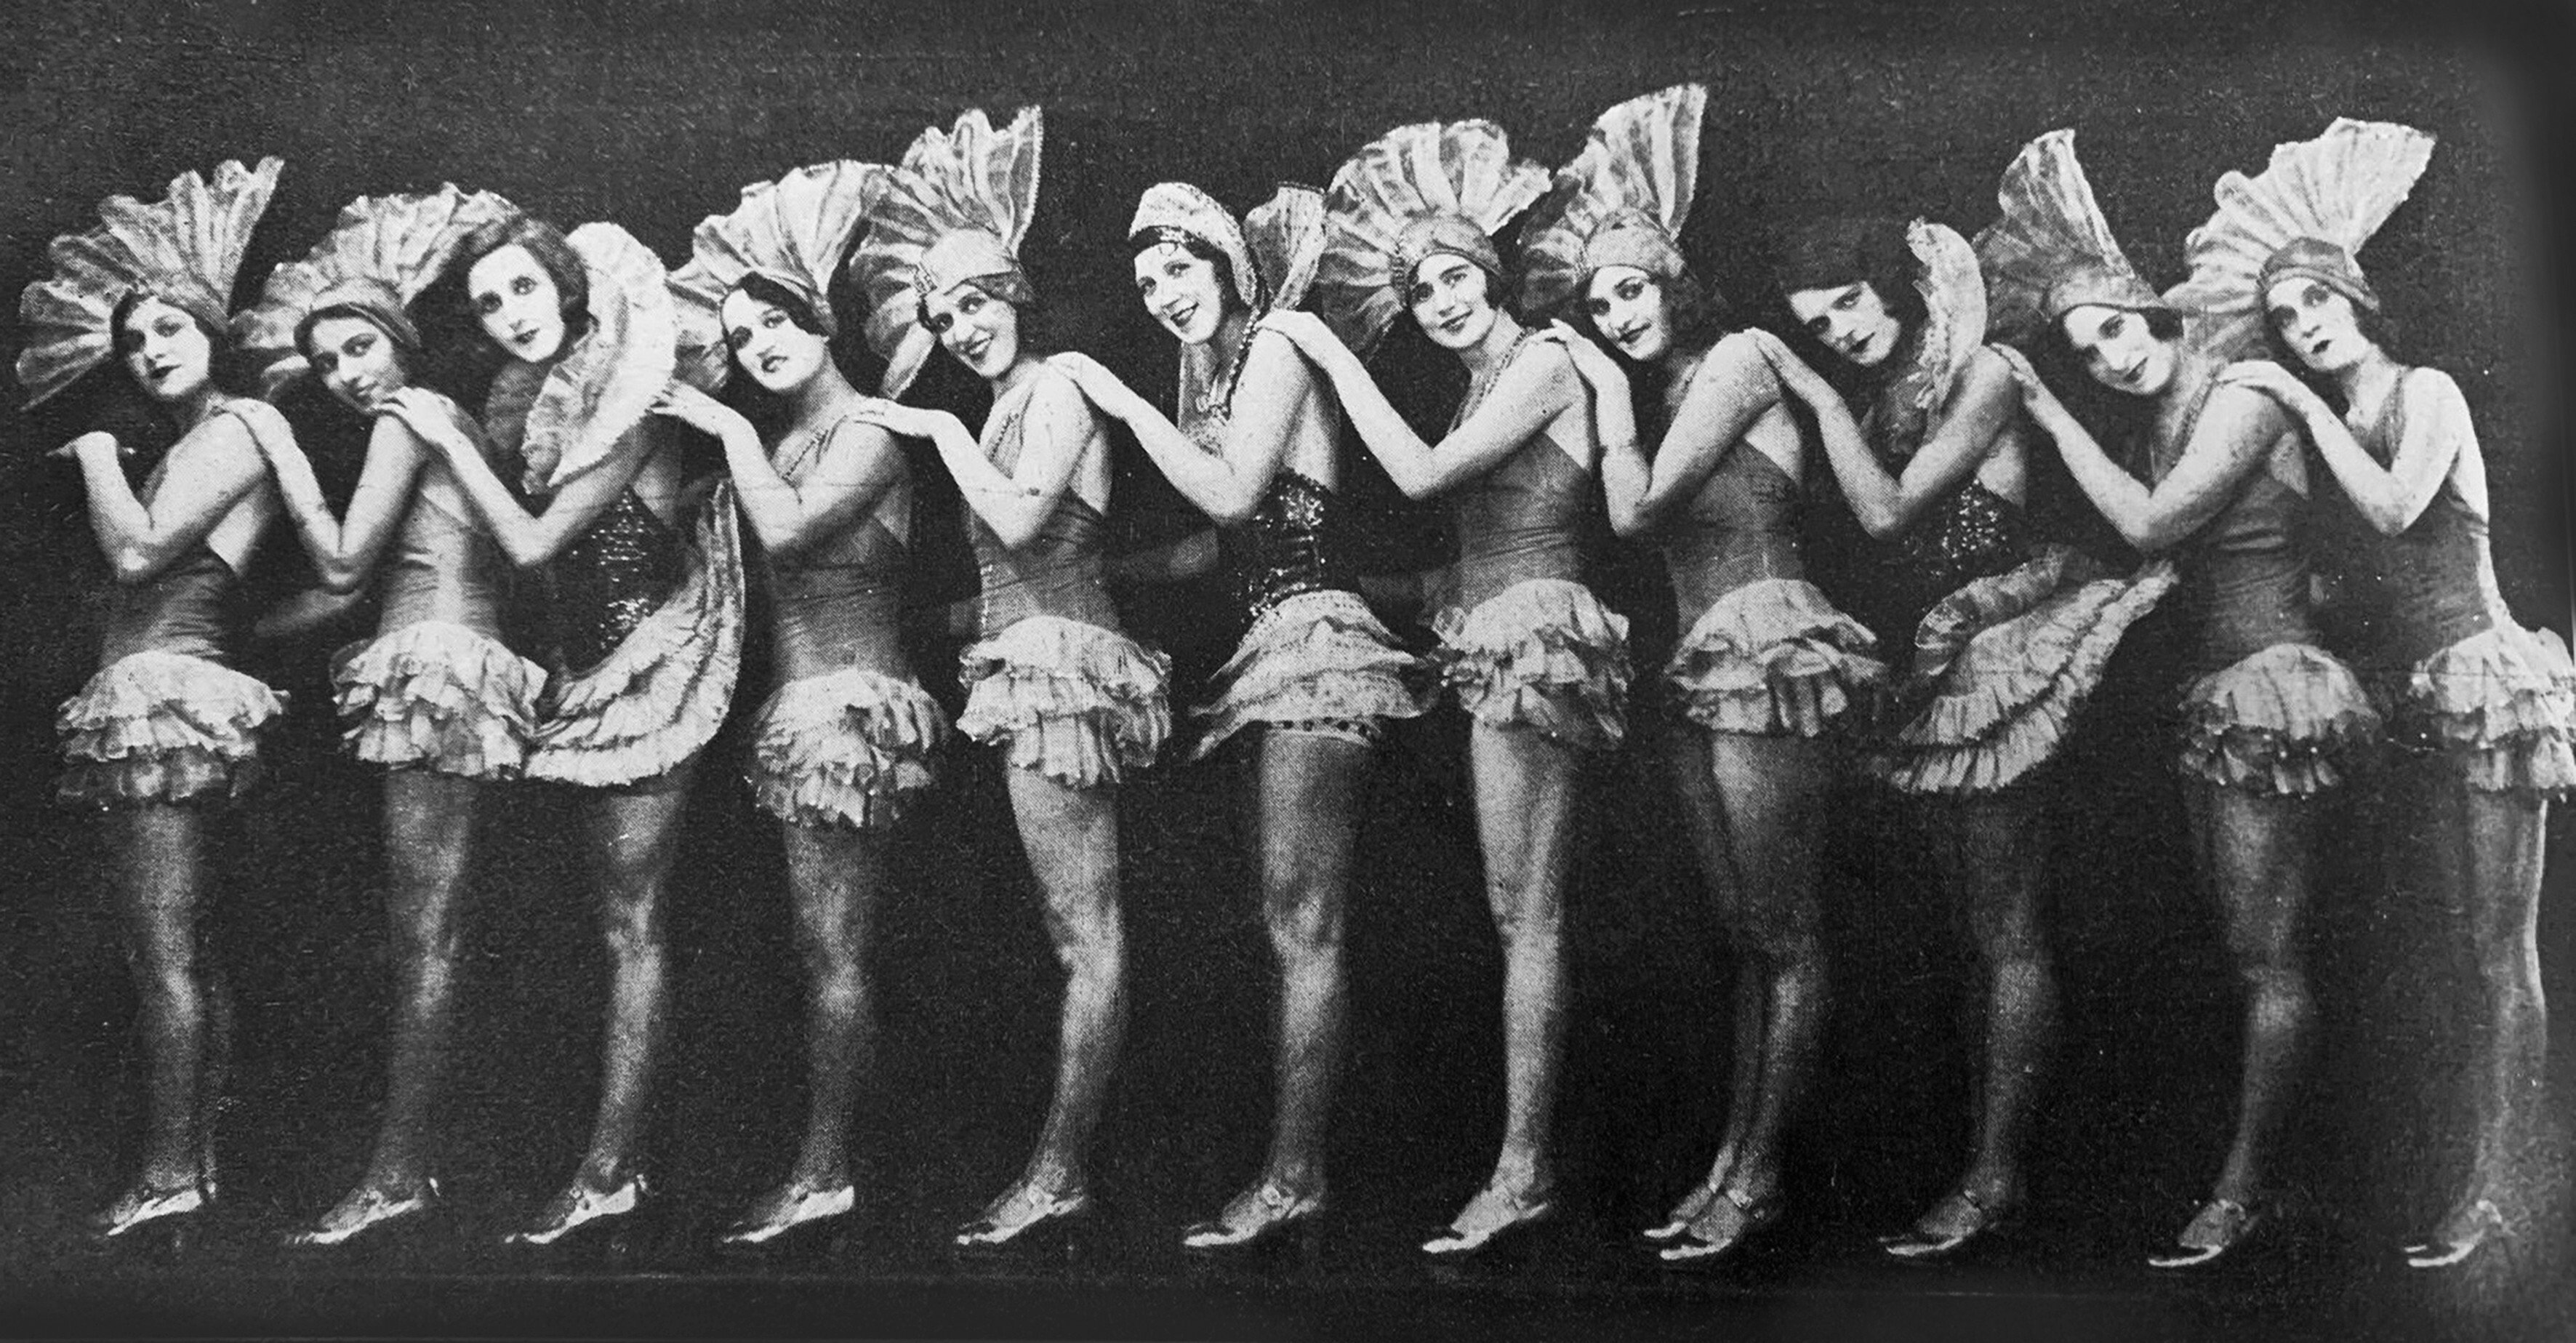 The Shanghai ballet troupe started by Nikolai Sokolsky and his wife, Evgenia Baranova, in a studio in the attic of the Lyceum Theatre. Photo: Handout